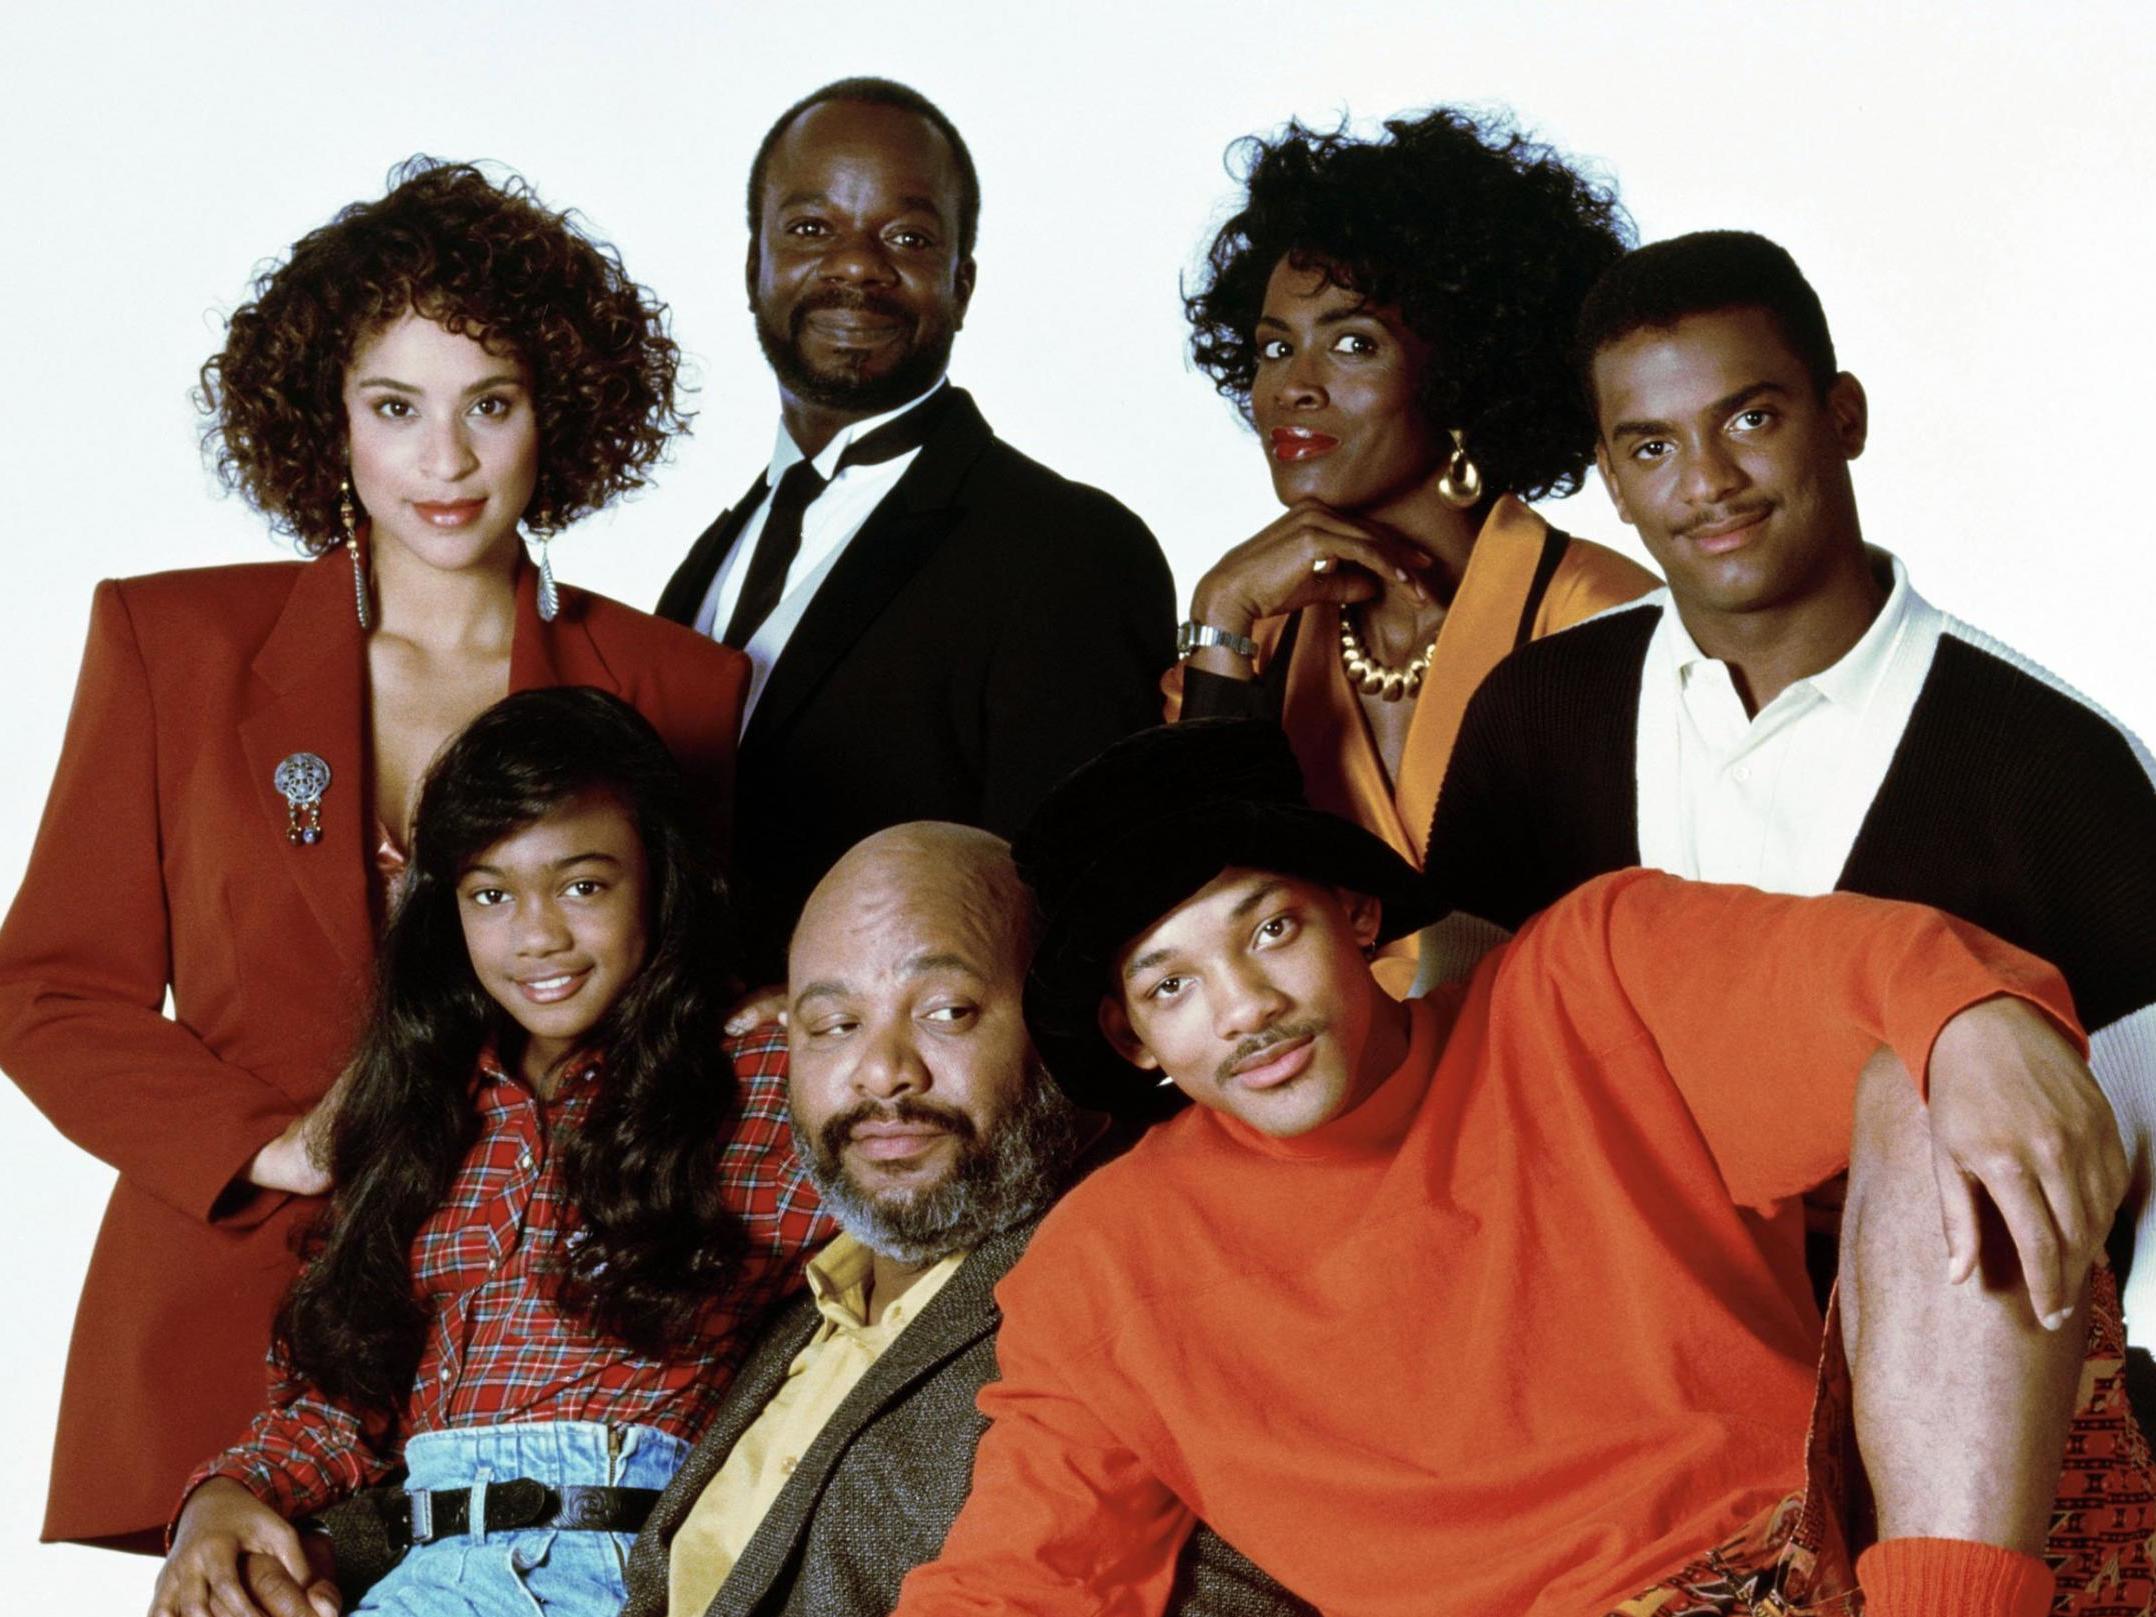 Now is a story… The Prince of Bel-Air redefined the Nineties sitcom | Independent | The Independent